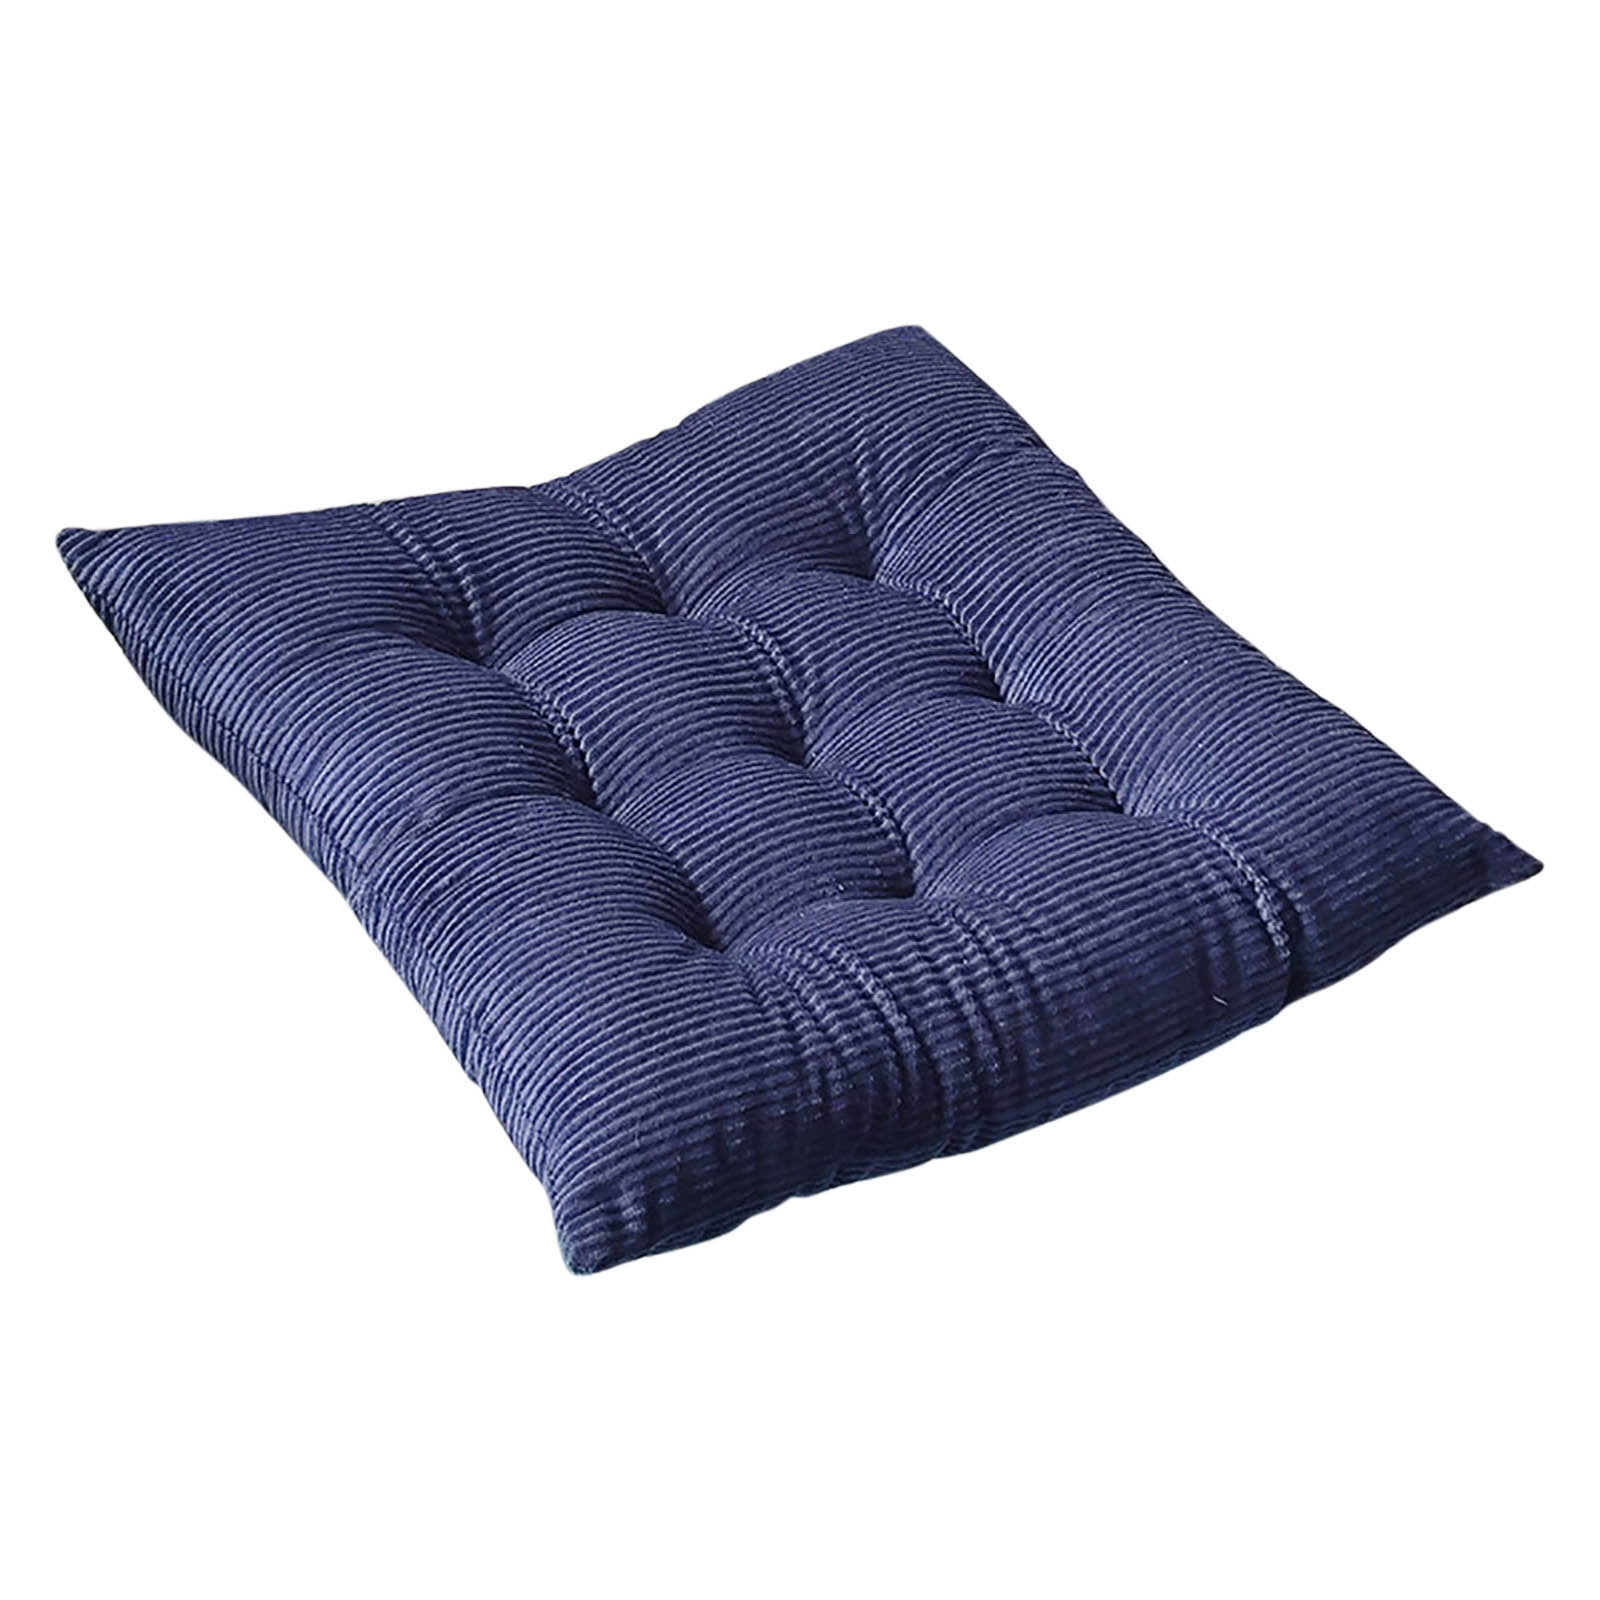 Support for Couch Cushions Pocket Spring Filling 2.5DPolyester Breathable Fiber Pockets with 40 Home Textiles Dining Seat Cushions, Size: One size